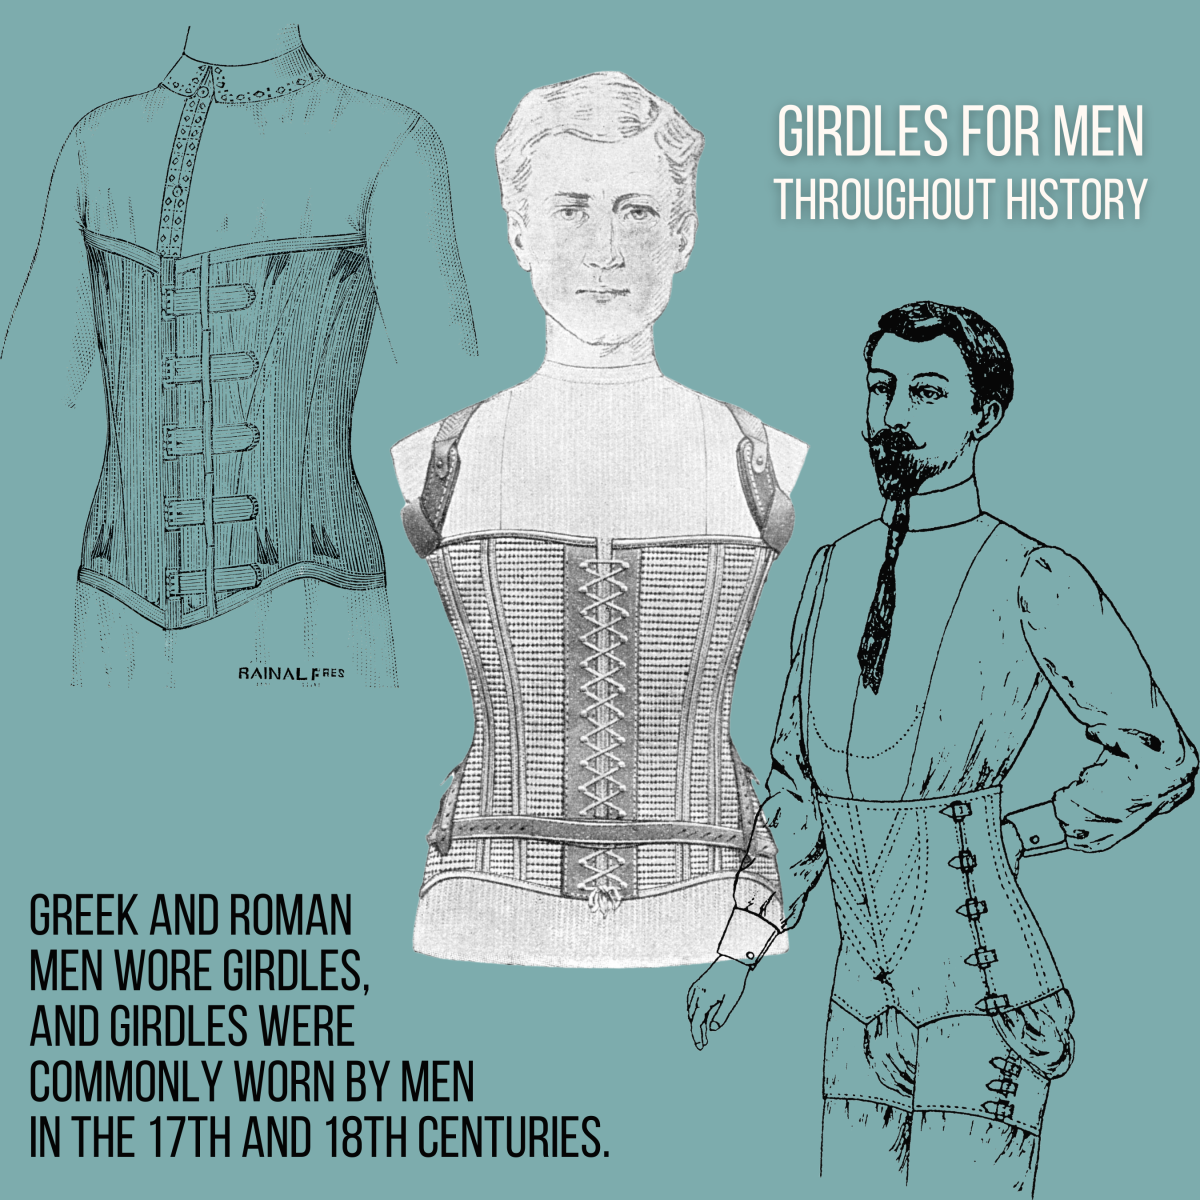 Breathe in chaps - the rise of men's girdles, Fashion